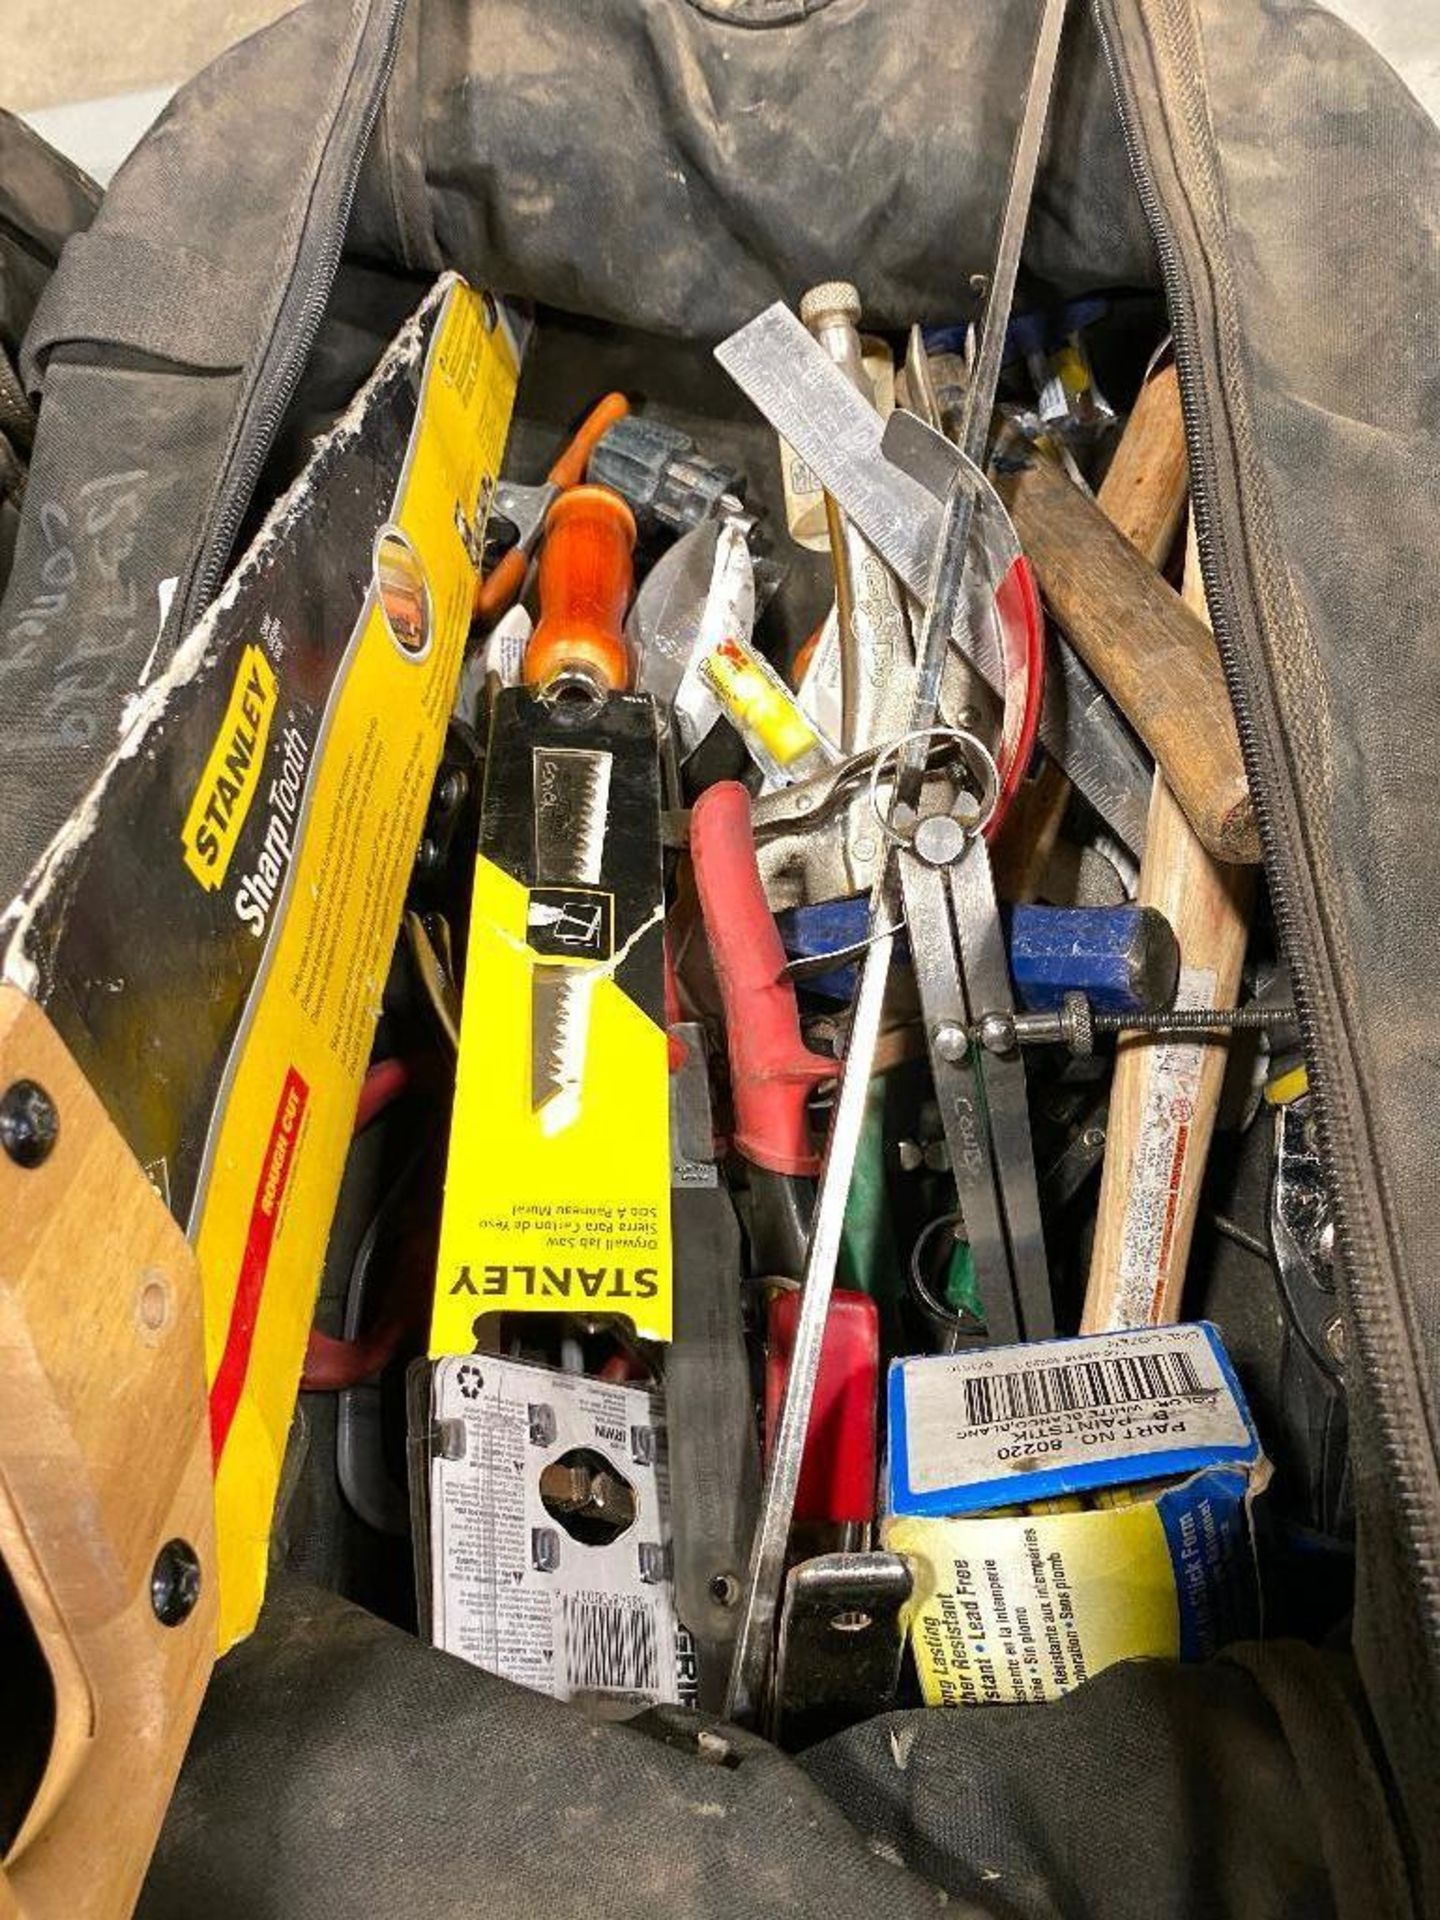 Lot of Asst. Hand Tools including Hammer, Saw, Snips, Vise Grips, Clamps, etc. - Image 6 of 6